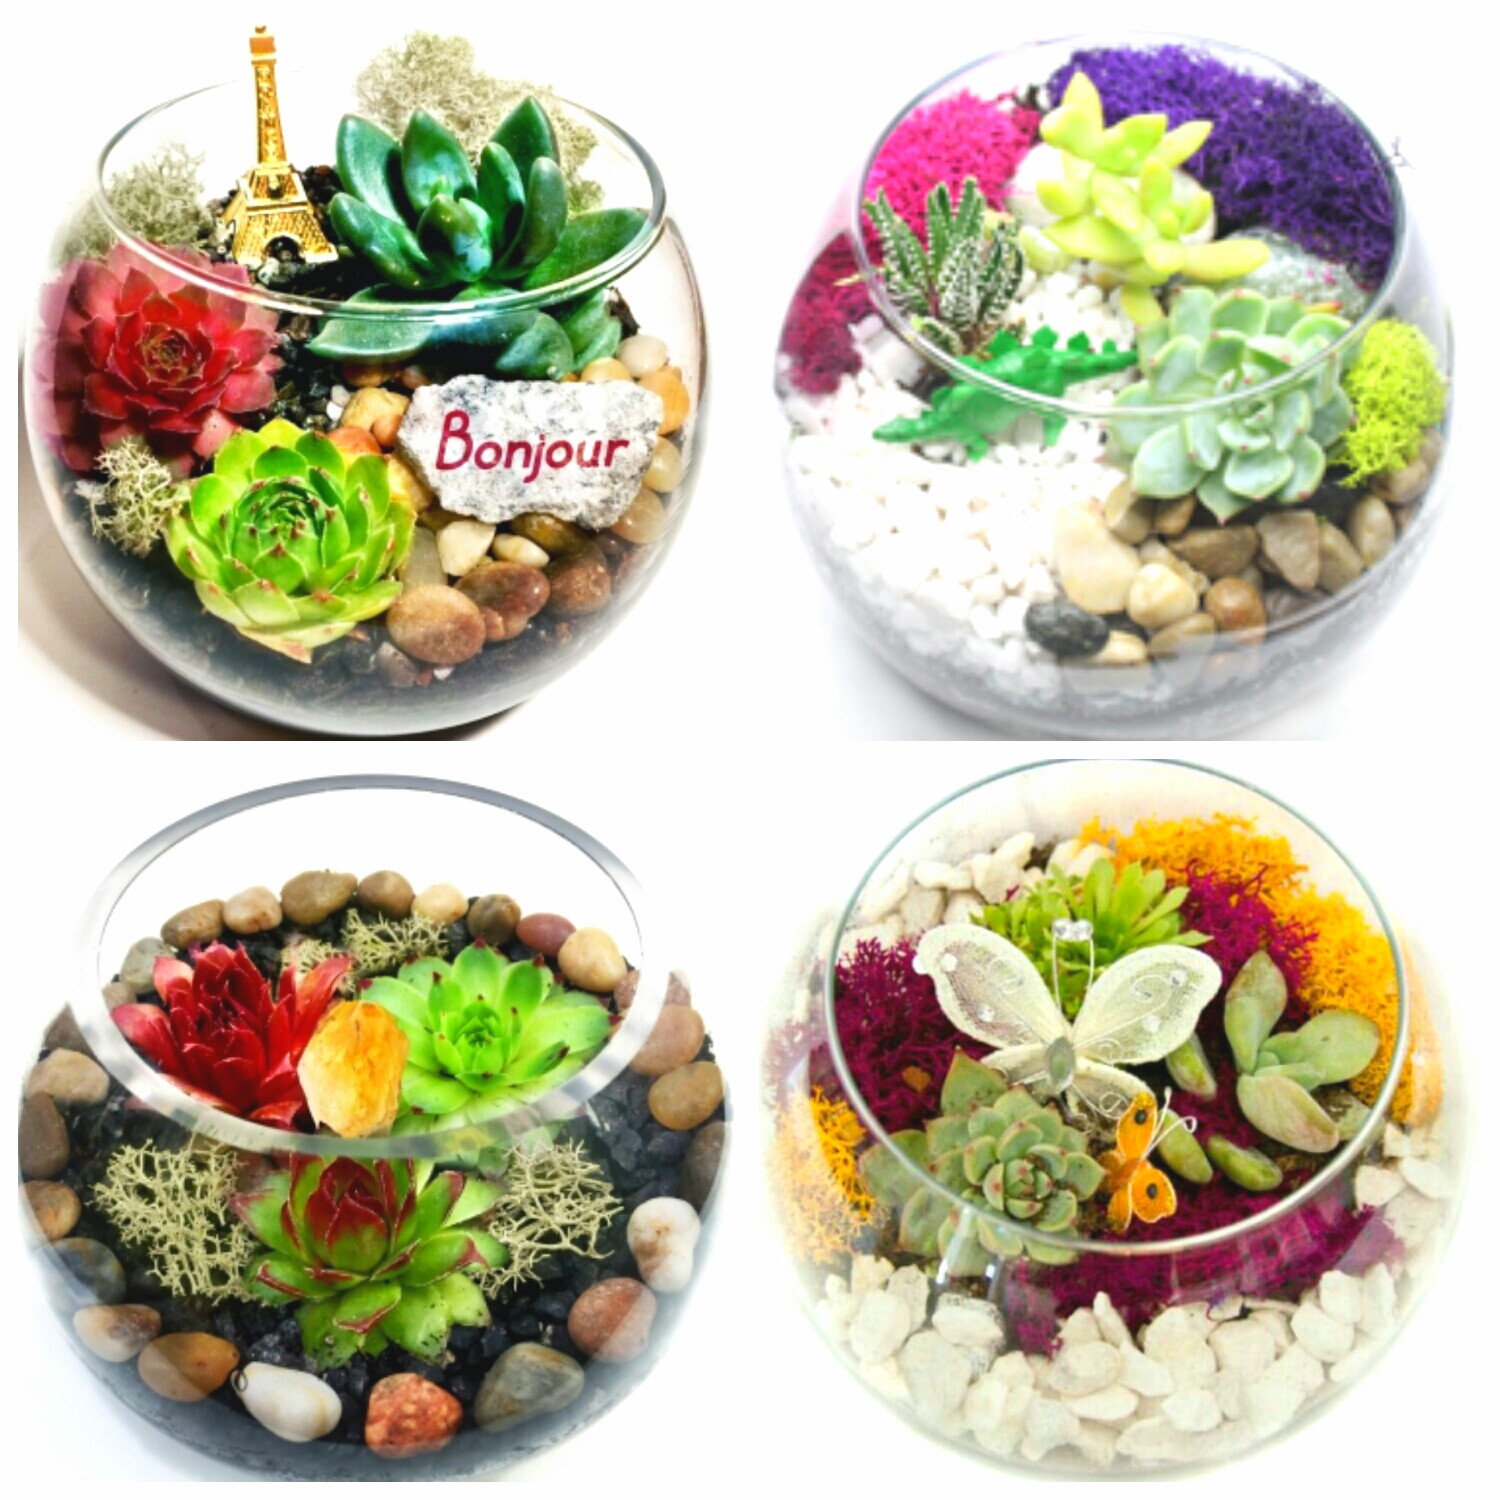 A Create a Succulent Terrarium You Pick the Design plant nite project by Yaymaker